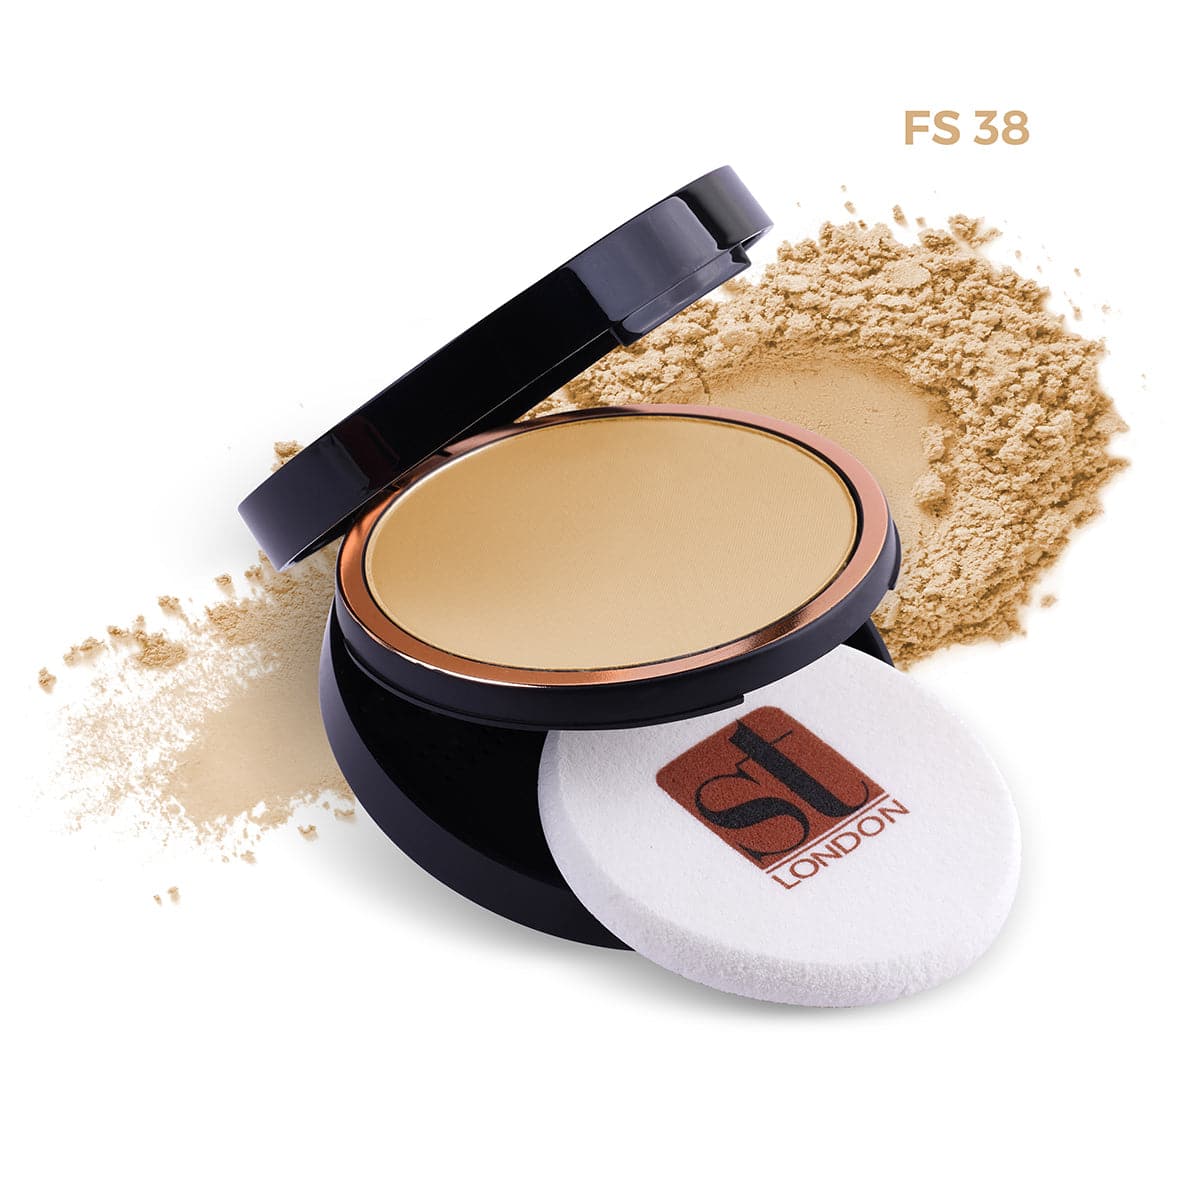 ST London Dual Wet & Dry Compact Powder - Fs 38 - Premium Health & Beauty from St London - Just Rs 2330.00! Shop now at Cozmetica